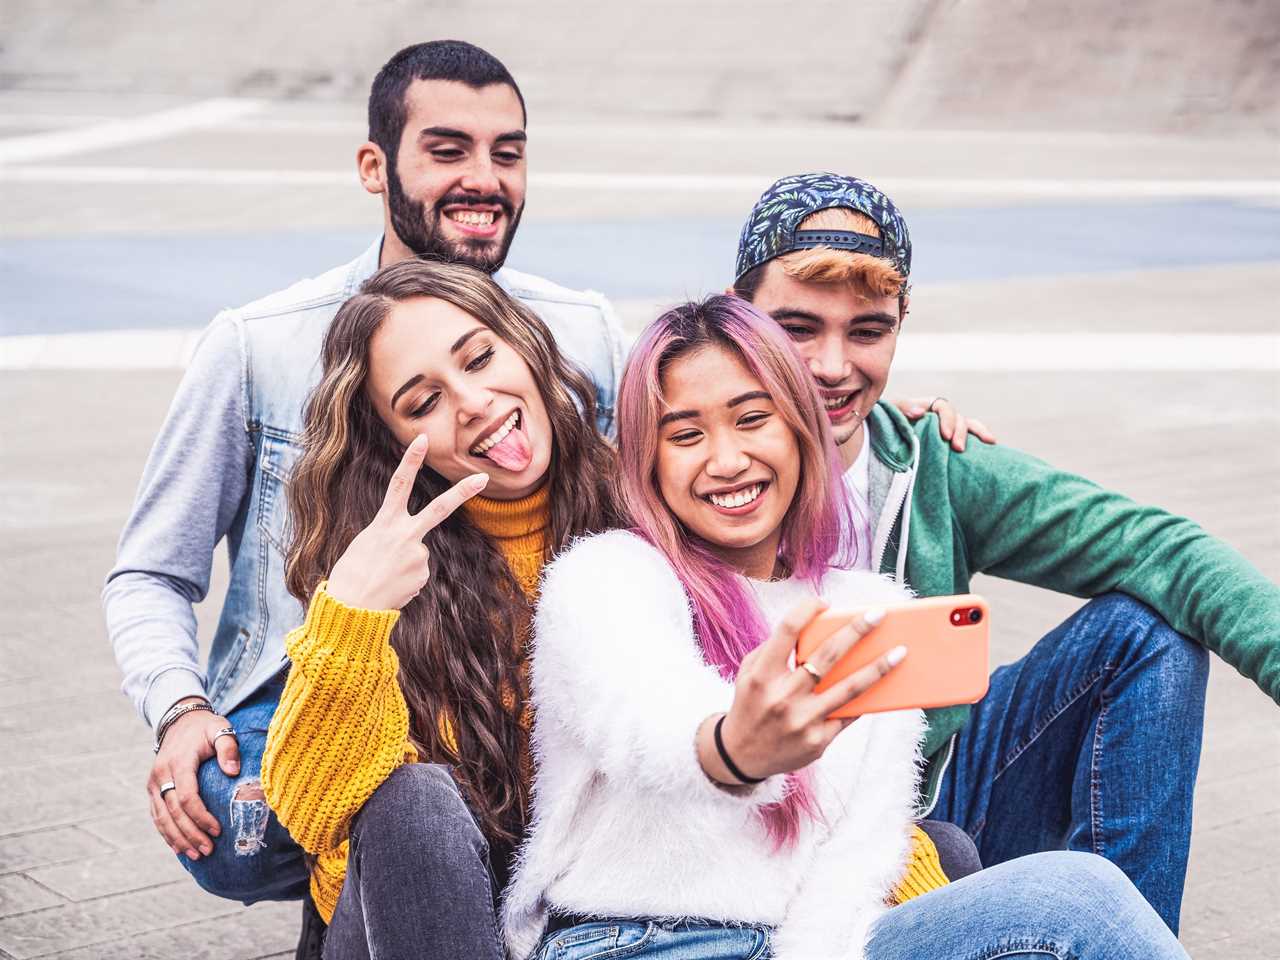 Gen Z hangs out in a group setting and takes a selfie